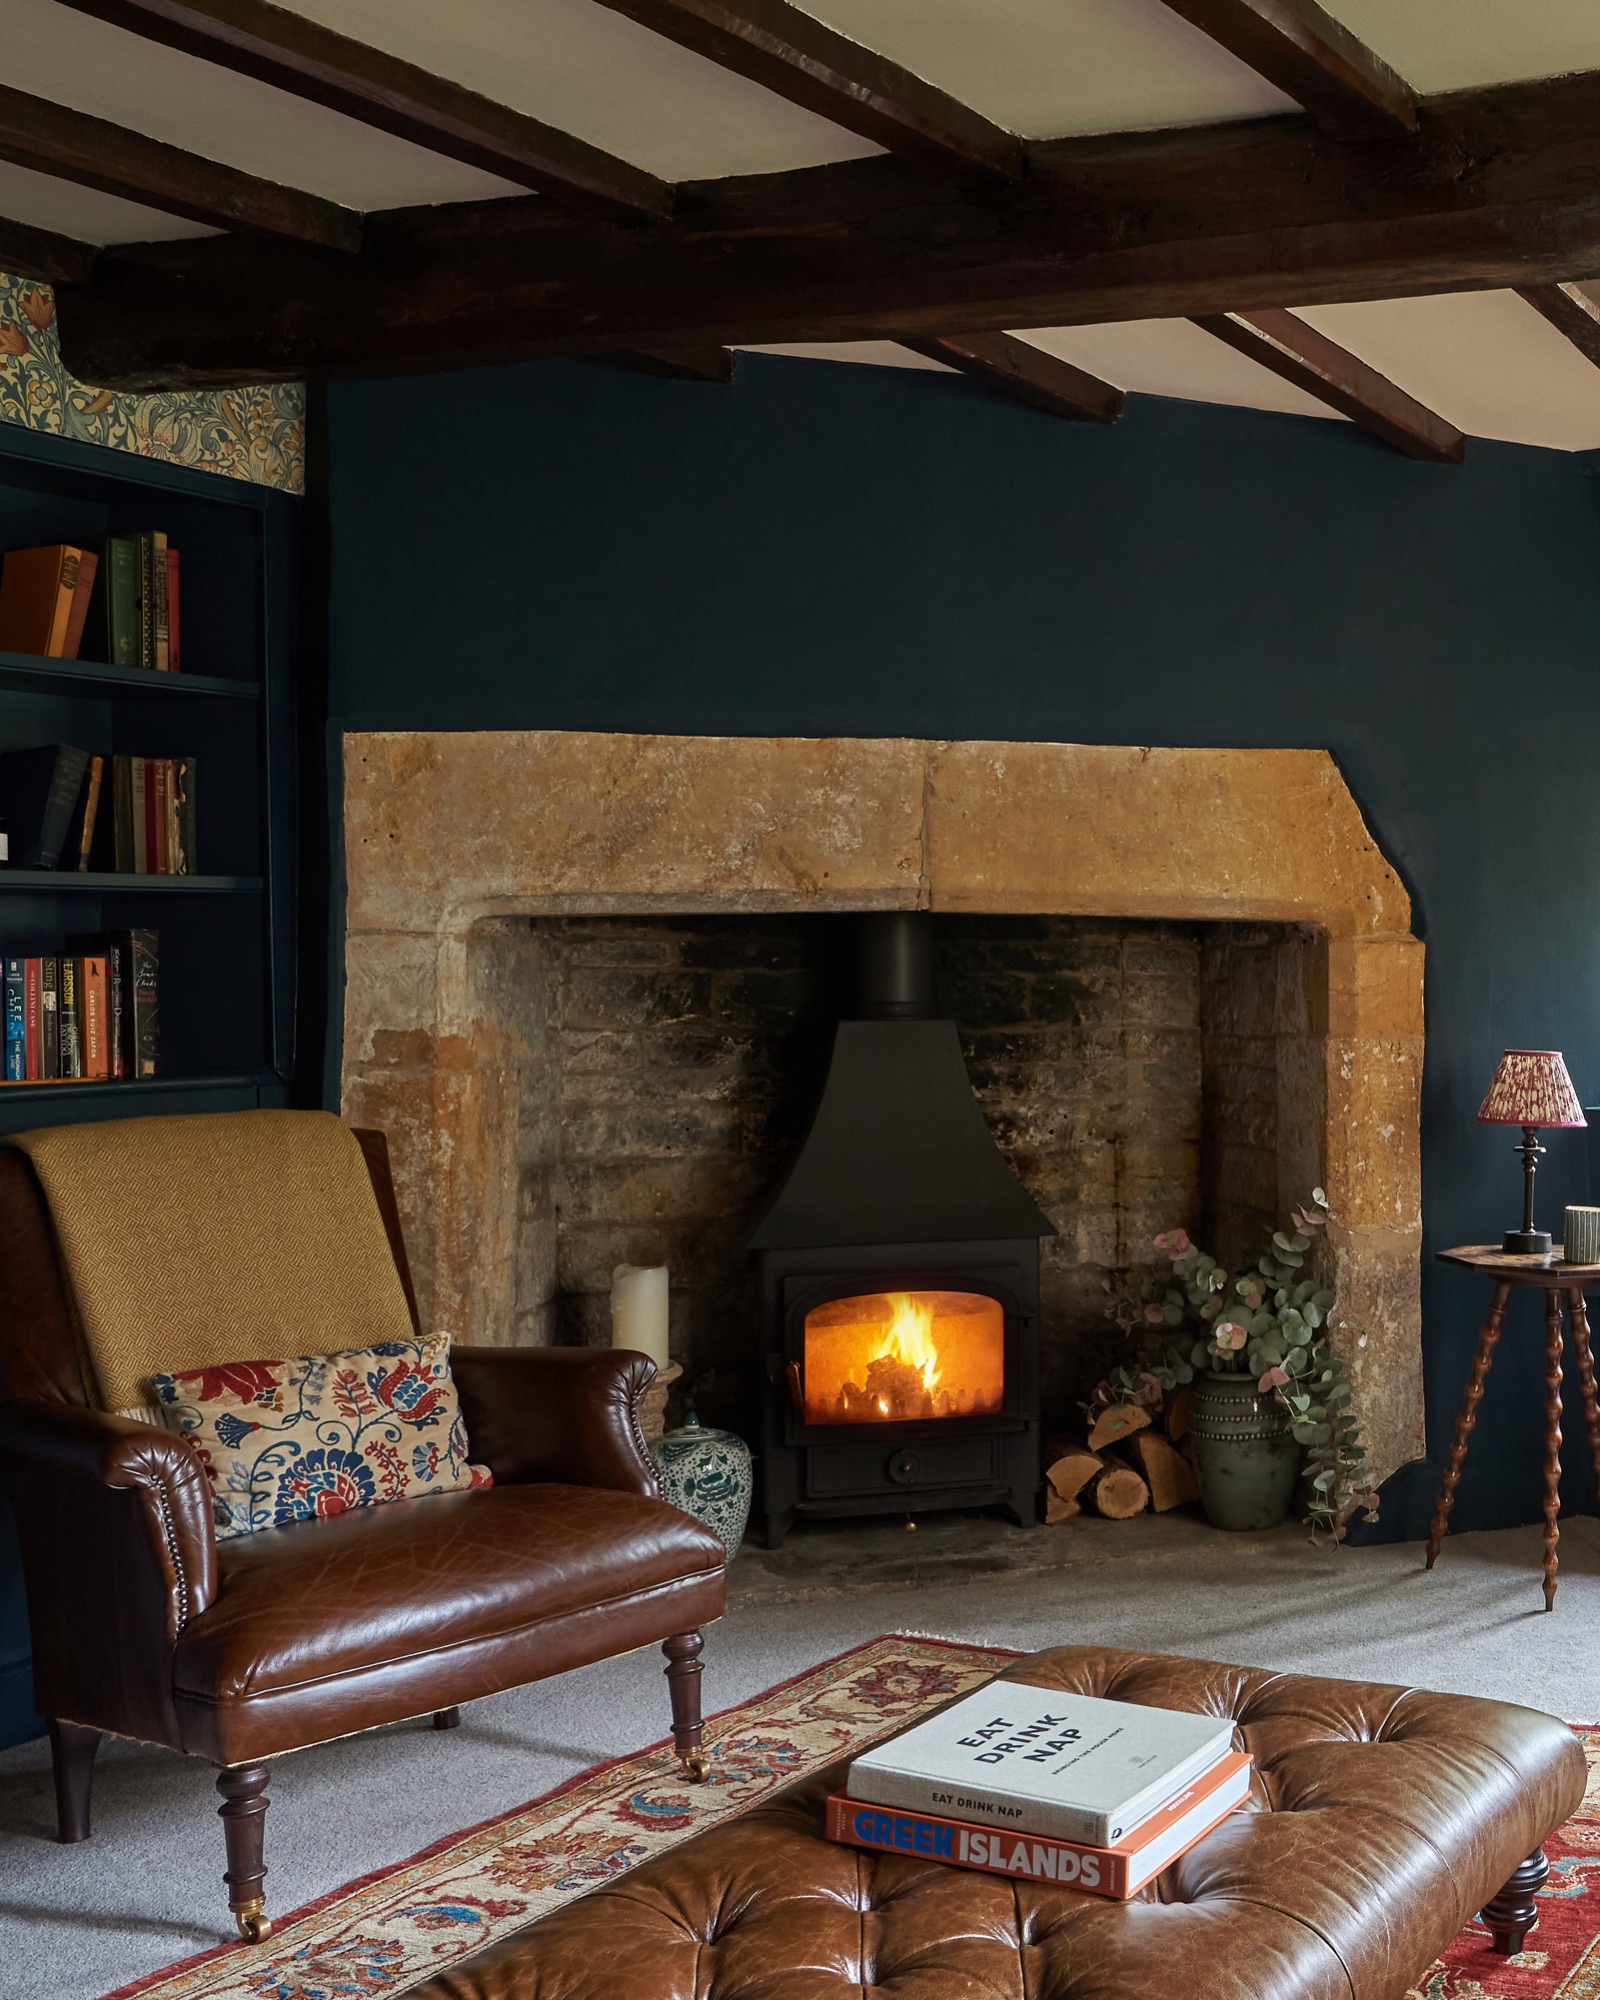 Hague blue farrow and ball snug with William Morris wallpaper, open stone fireplace with antique leather armchair and leather footstool